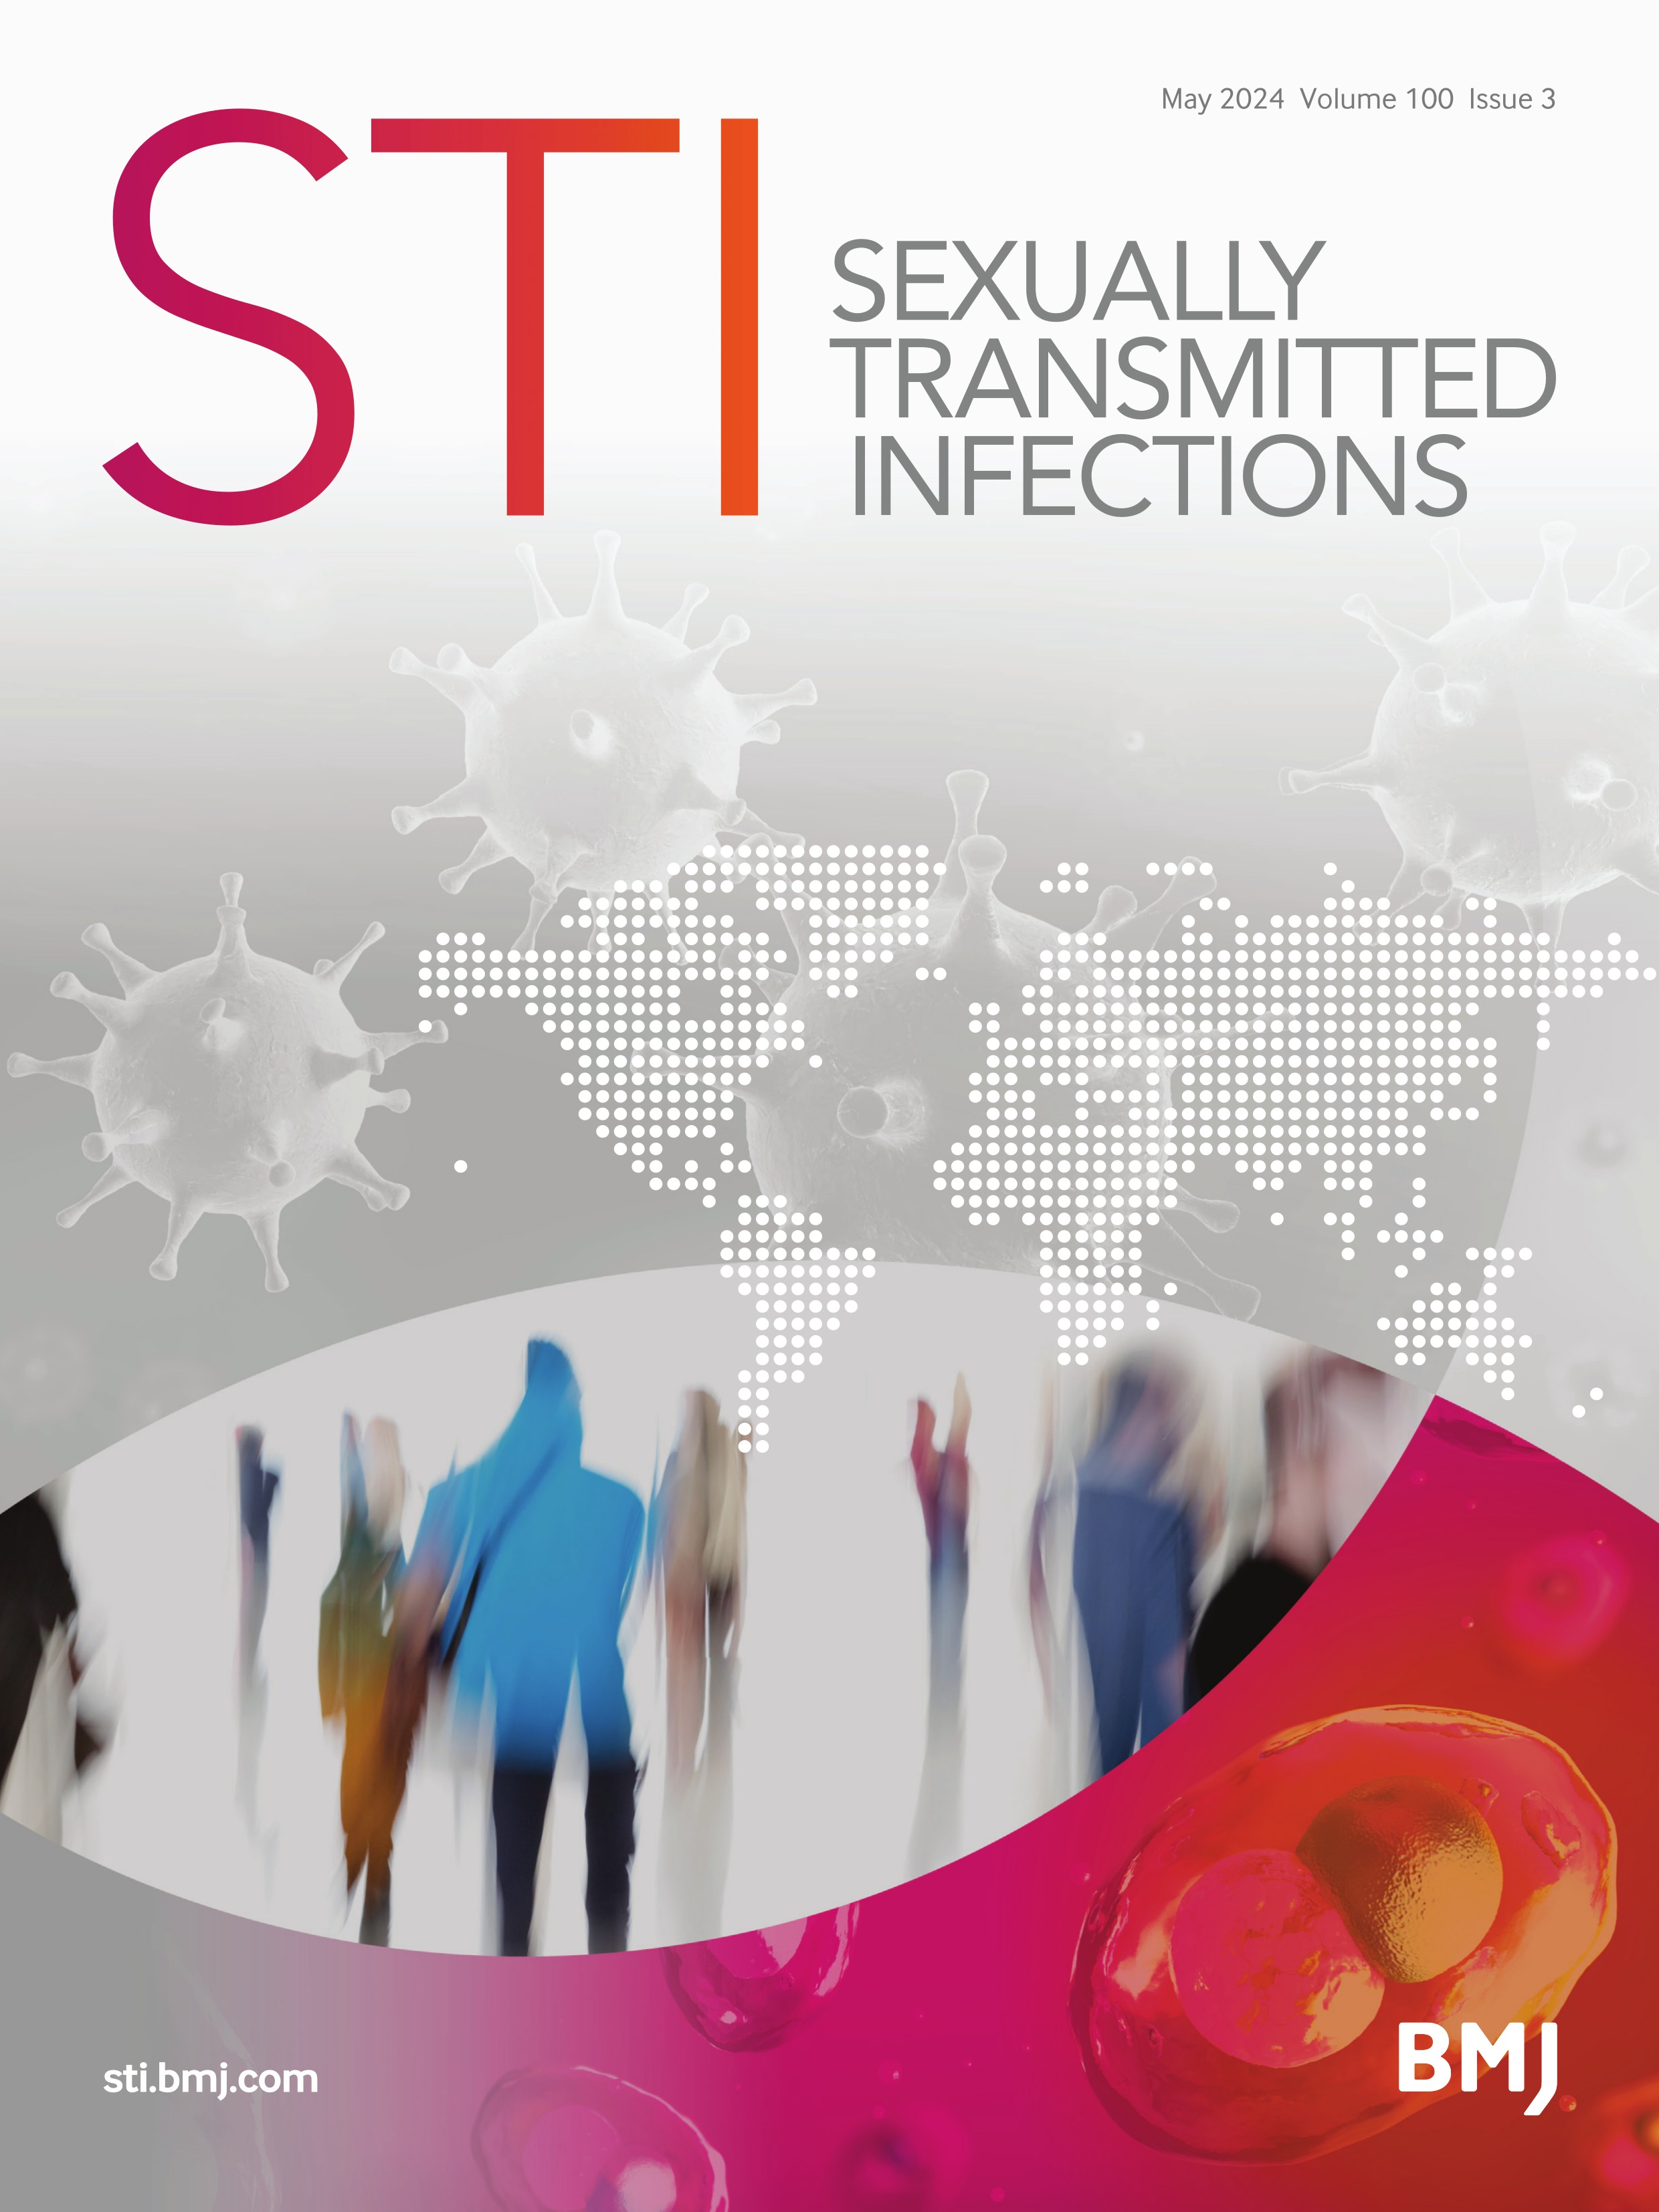 Aetiological molecular identification of sexually transmitted infections that cause urethral discharge syndrome and genital ulcer disease in Brazilian men: a nationwide study